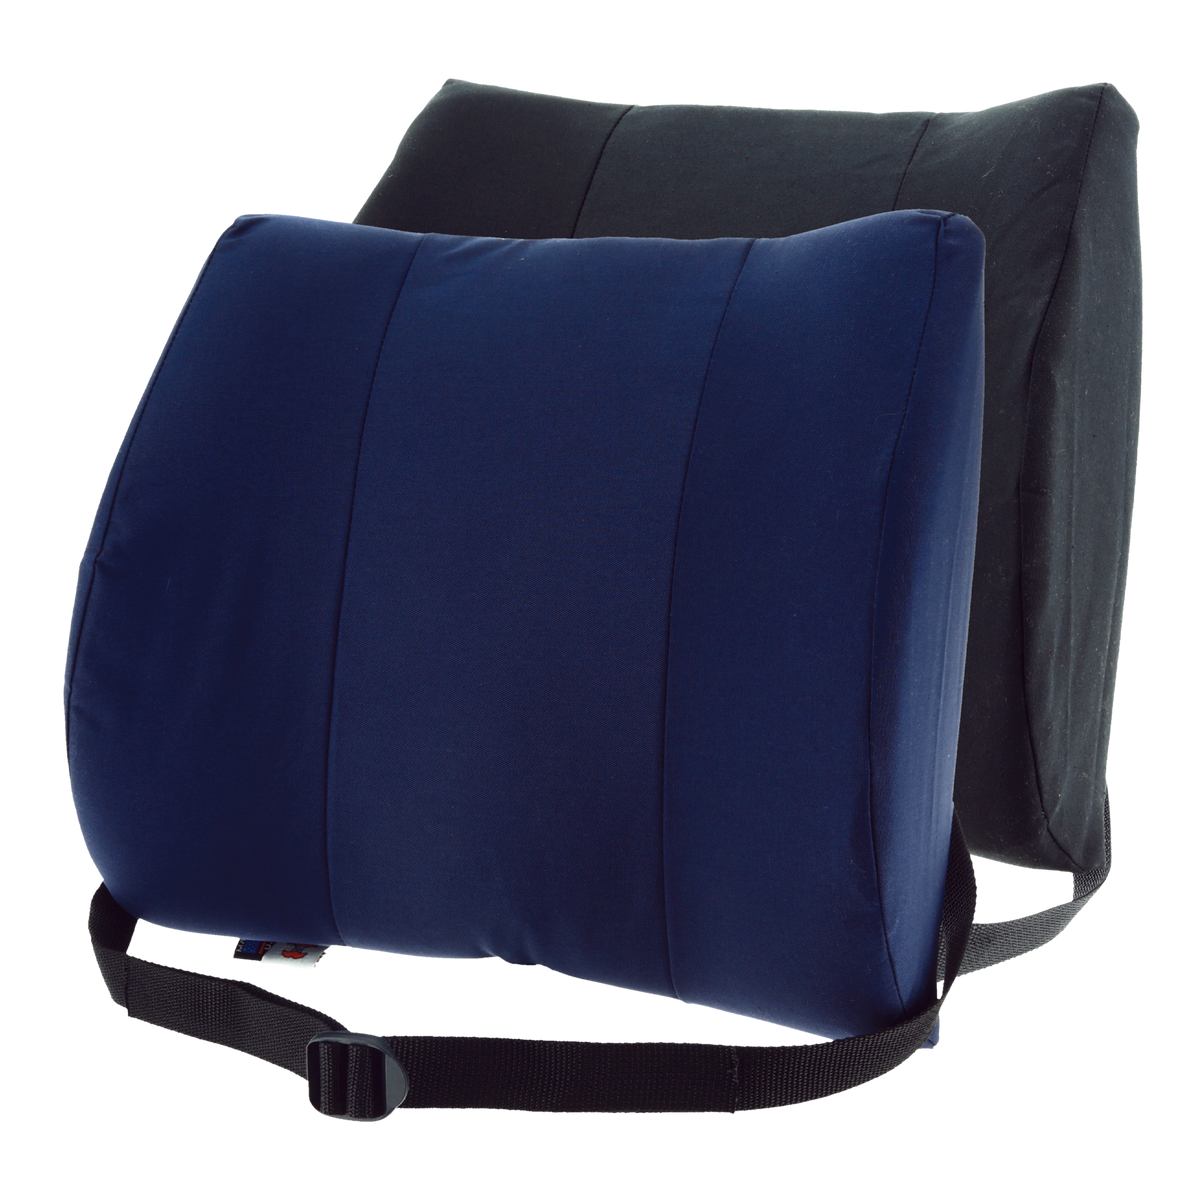 Waist by memory cotton lumbar cushion office car backrest cushion lumbar  cushion rest lumbar lumbar support